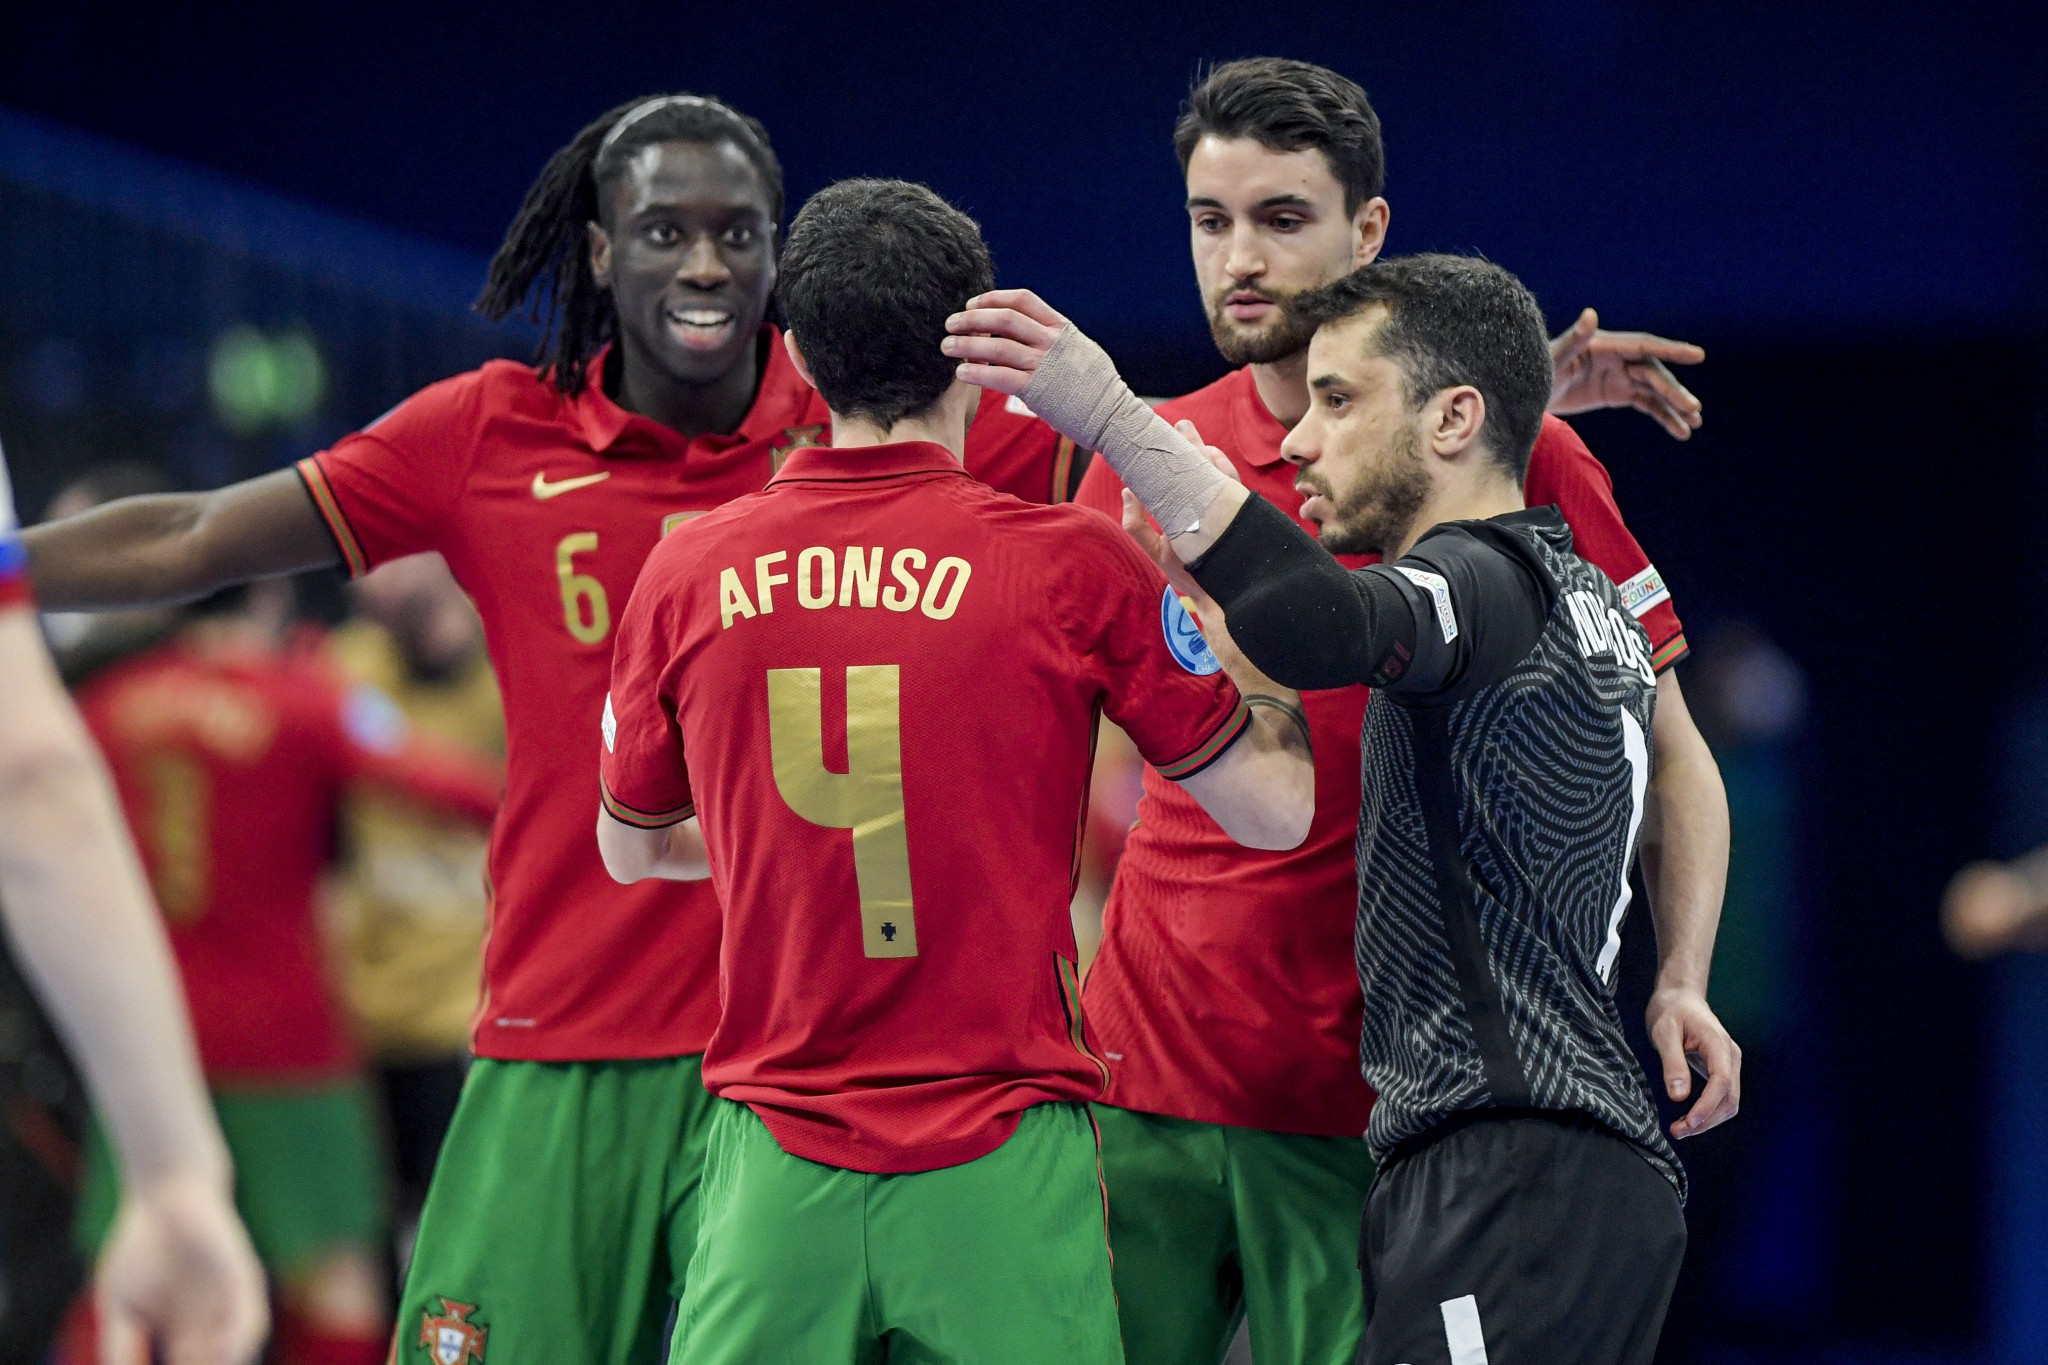 Portugal stage another comeback to win second consecutive UEFA Futsal Euro crown 